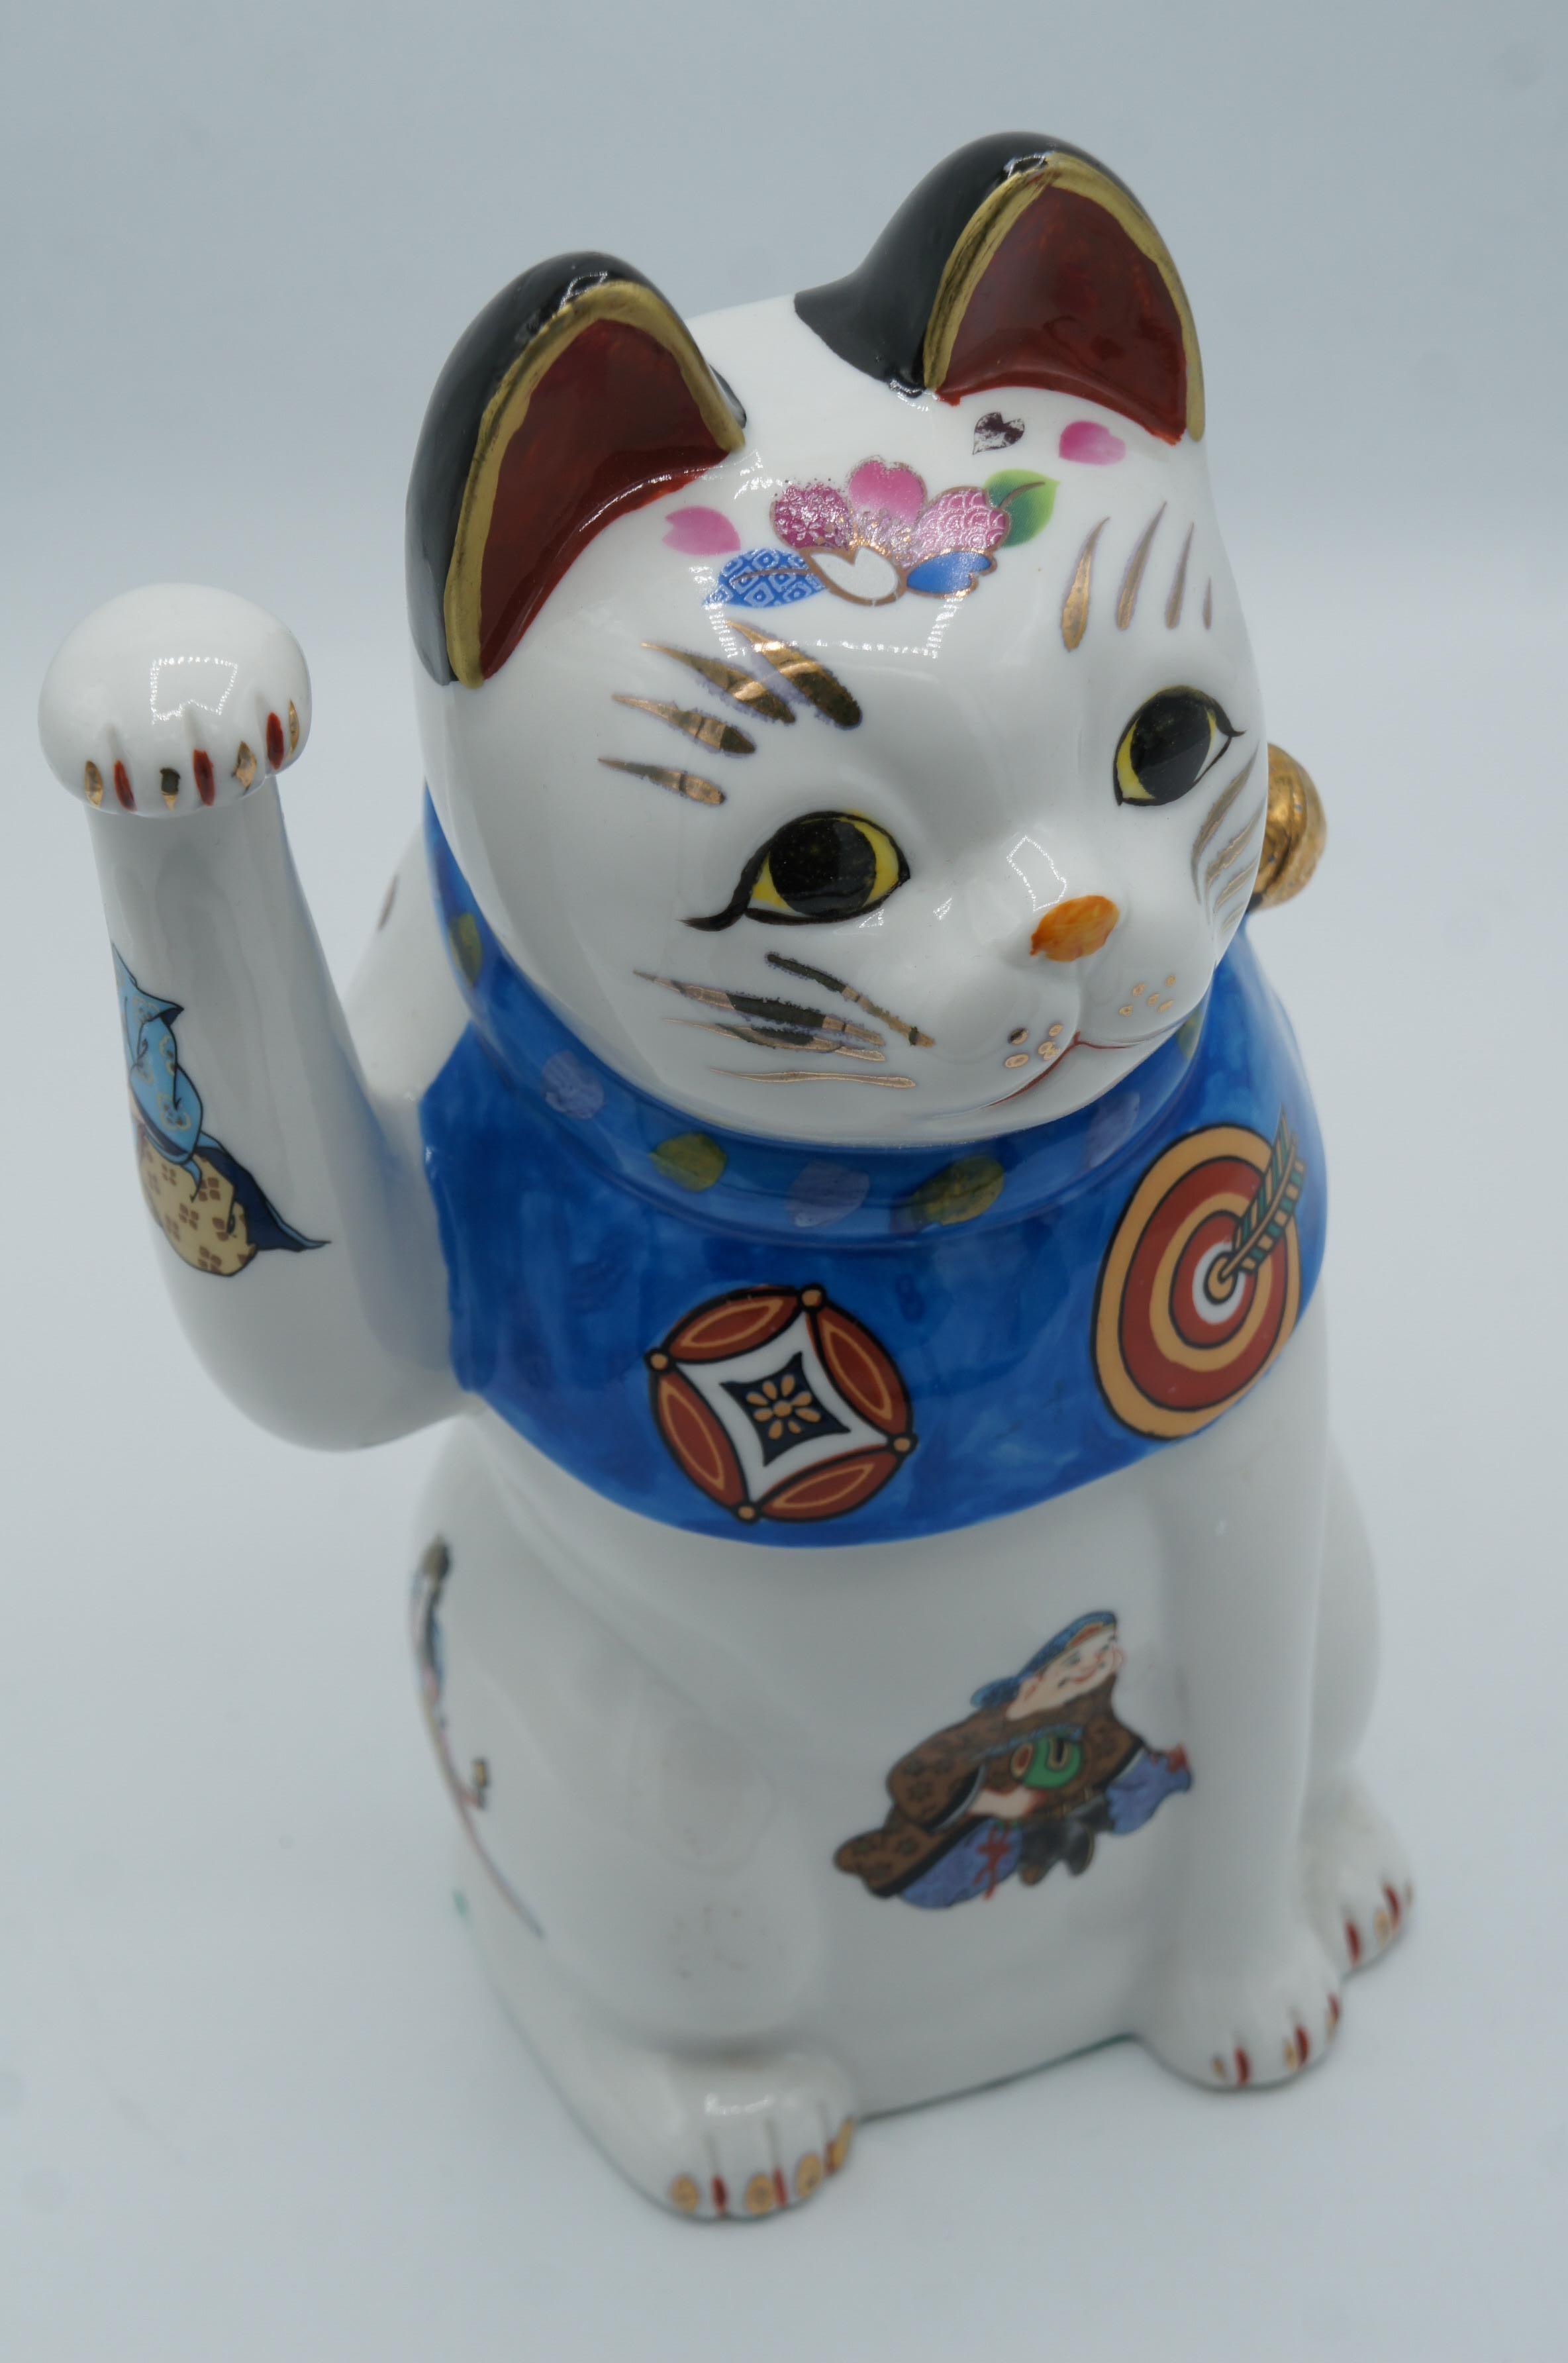 Era: Showa (around 1980)
Material: porcelain
The maneki-neko is a common Japanese figurine which is often believed to bring good luck to the owner. 
*This manekineko is an antique piece made in Japan. It is not a new item and may have small